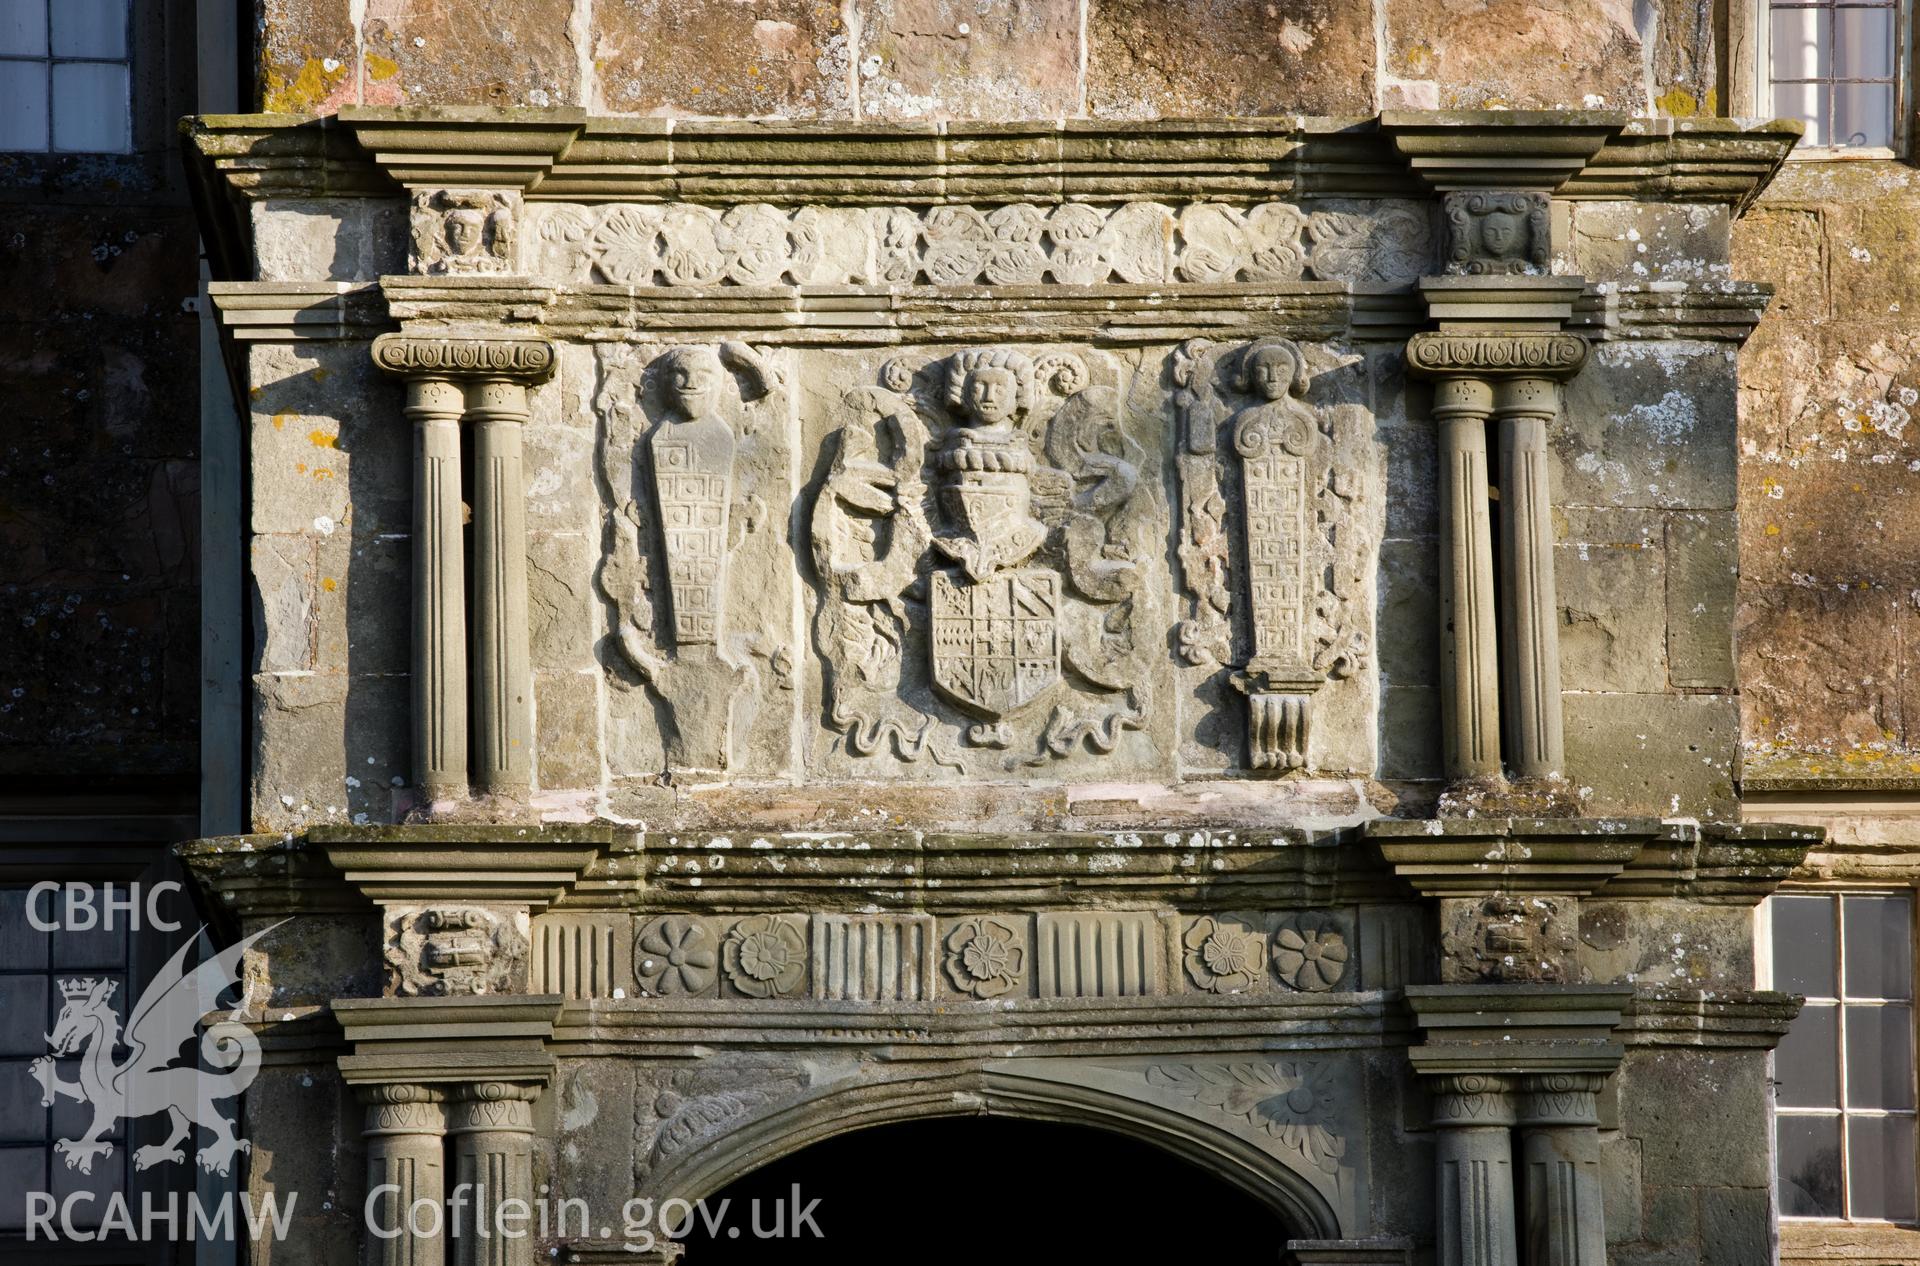 Detail of coat of arms on entrance porch.